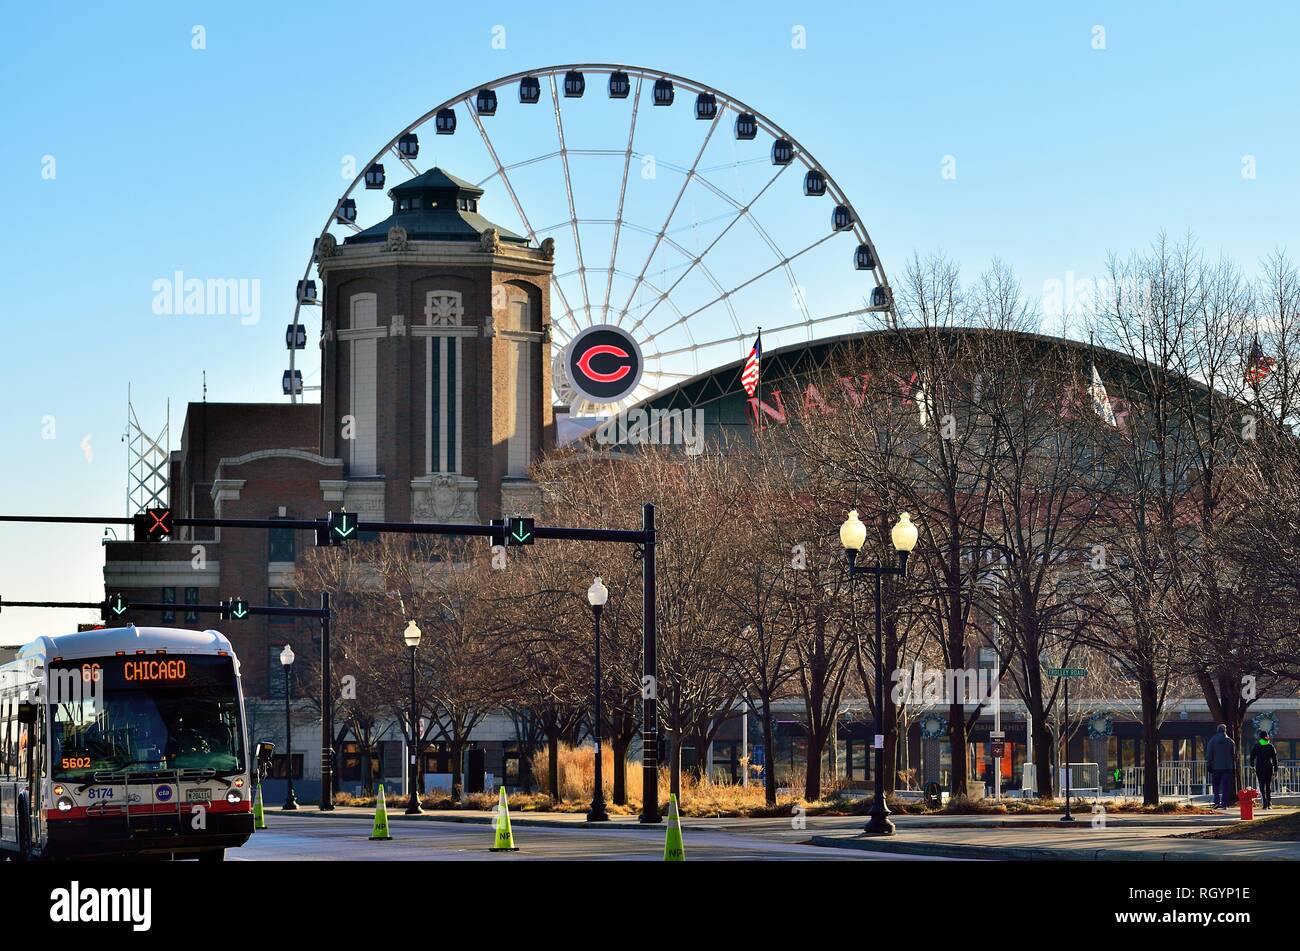 Chicago, Illinois, USA. Navy Pier on a cold, clear January morning is all but deserted except for the CTA bus on its route to the city's downtown. Stock Photo